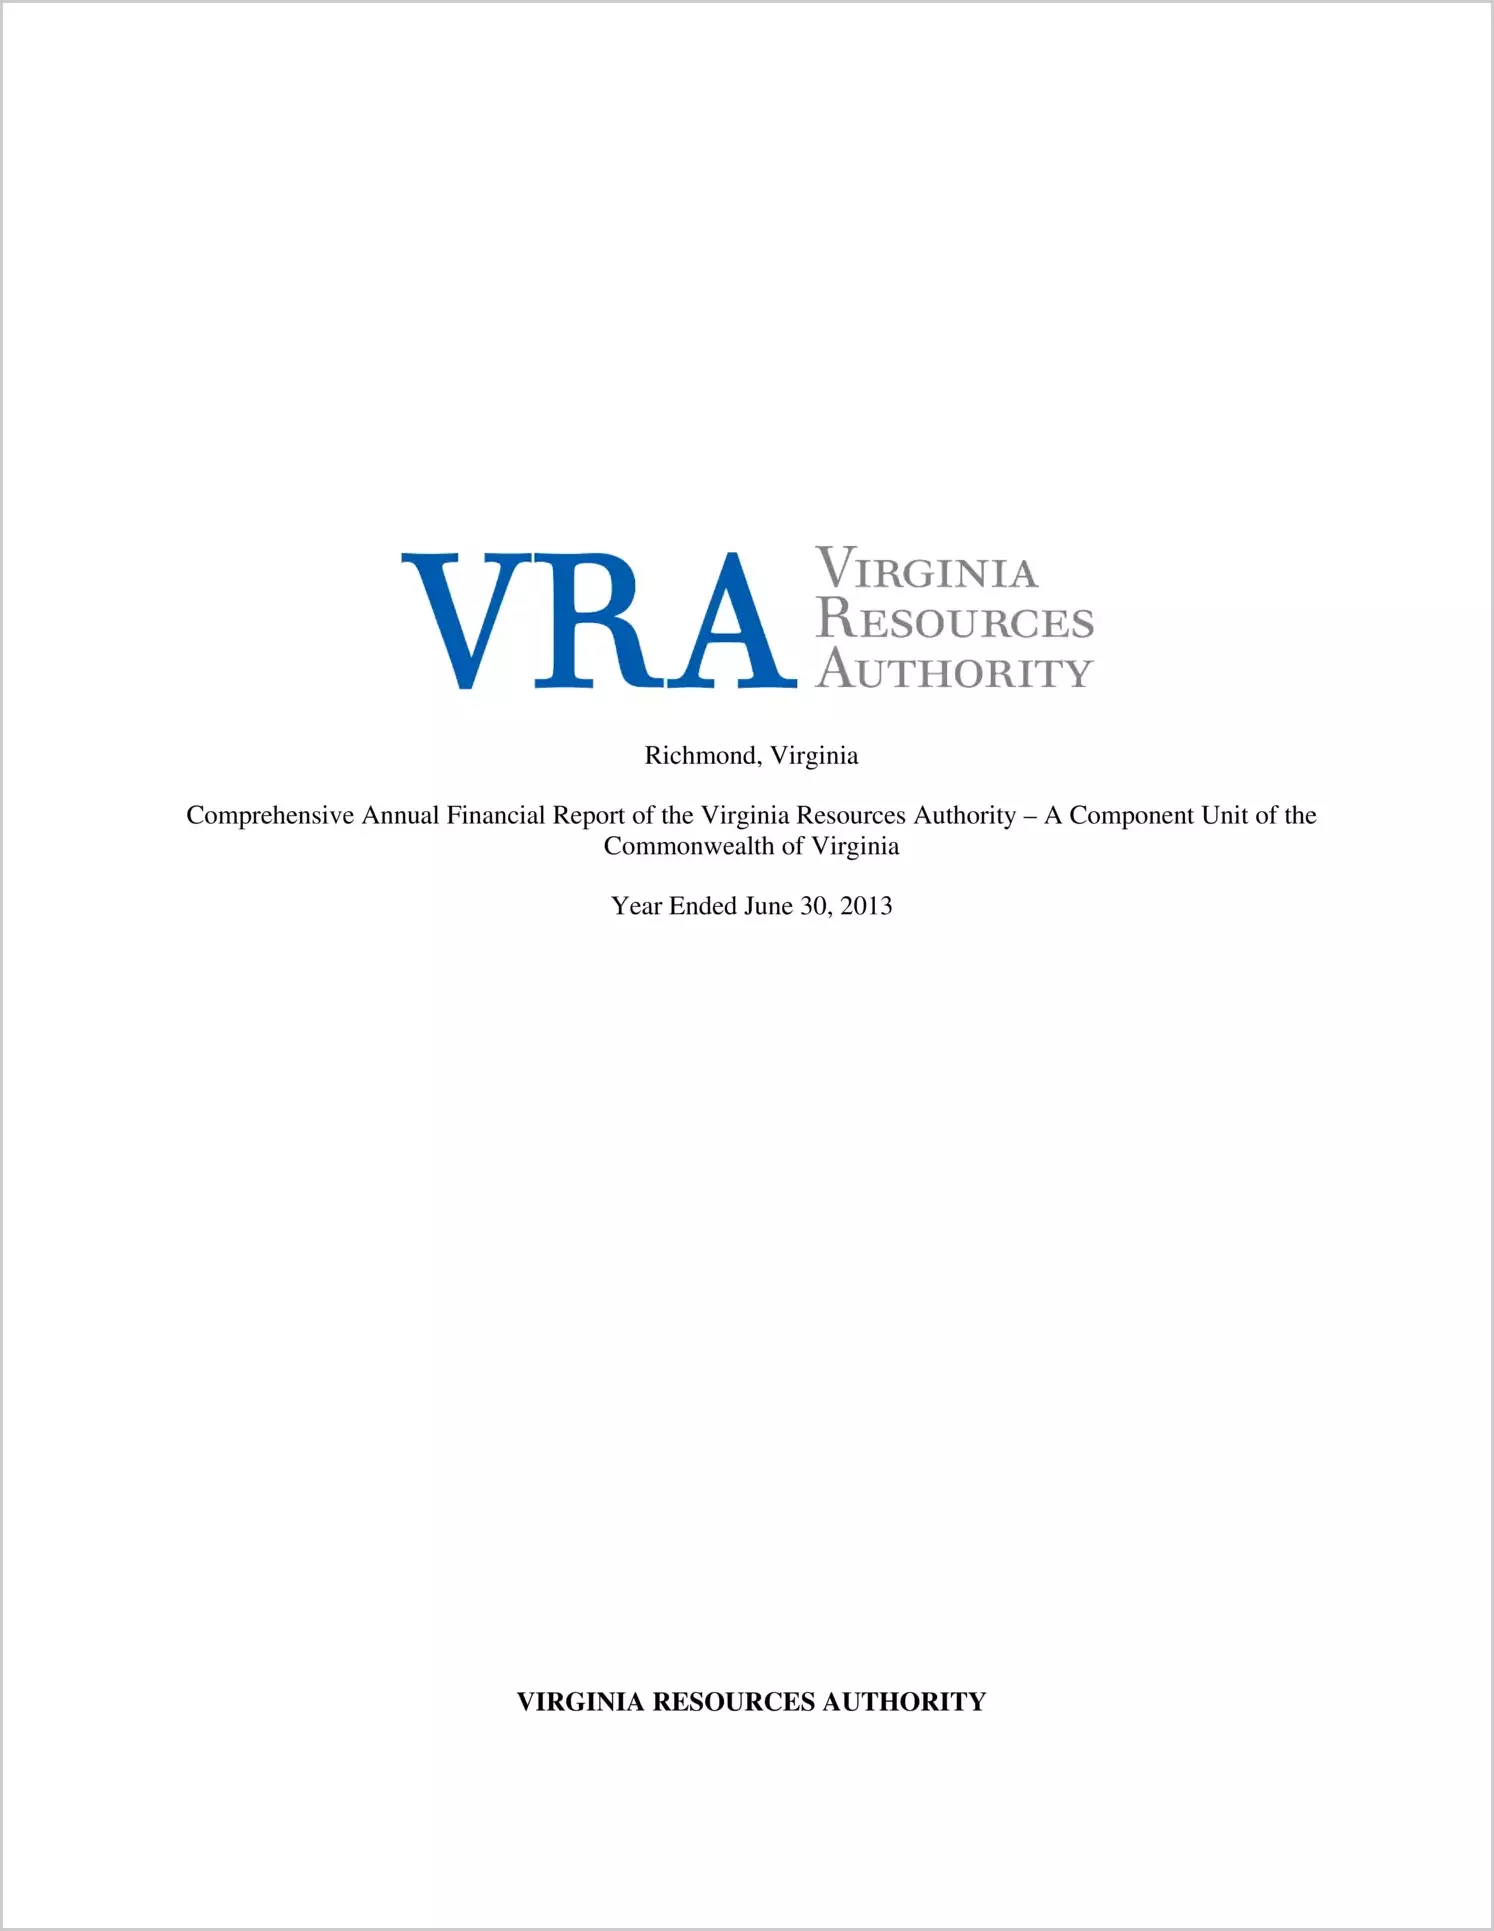 Virginia Resources Authority Financial Statements for the fiscal year ended June 30, 2013